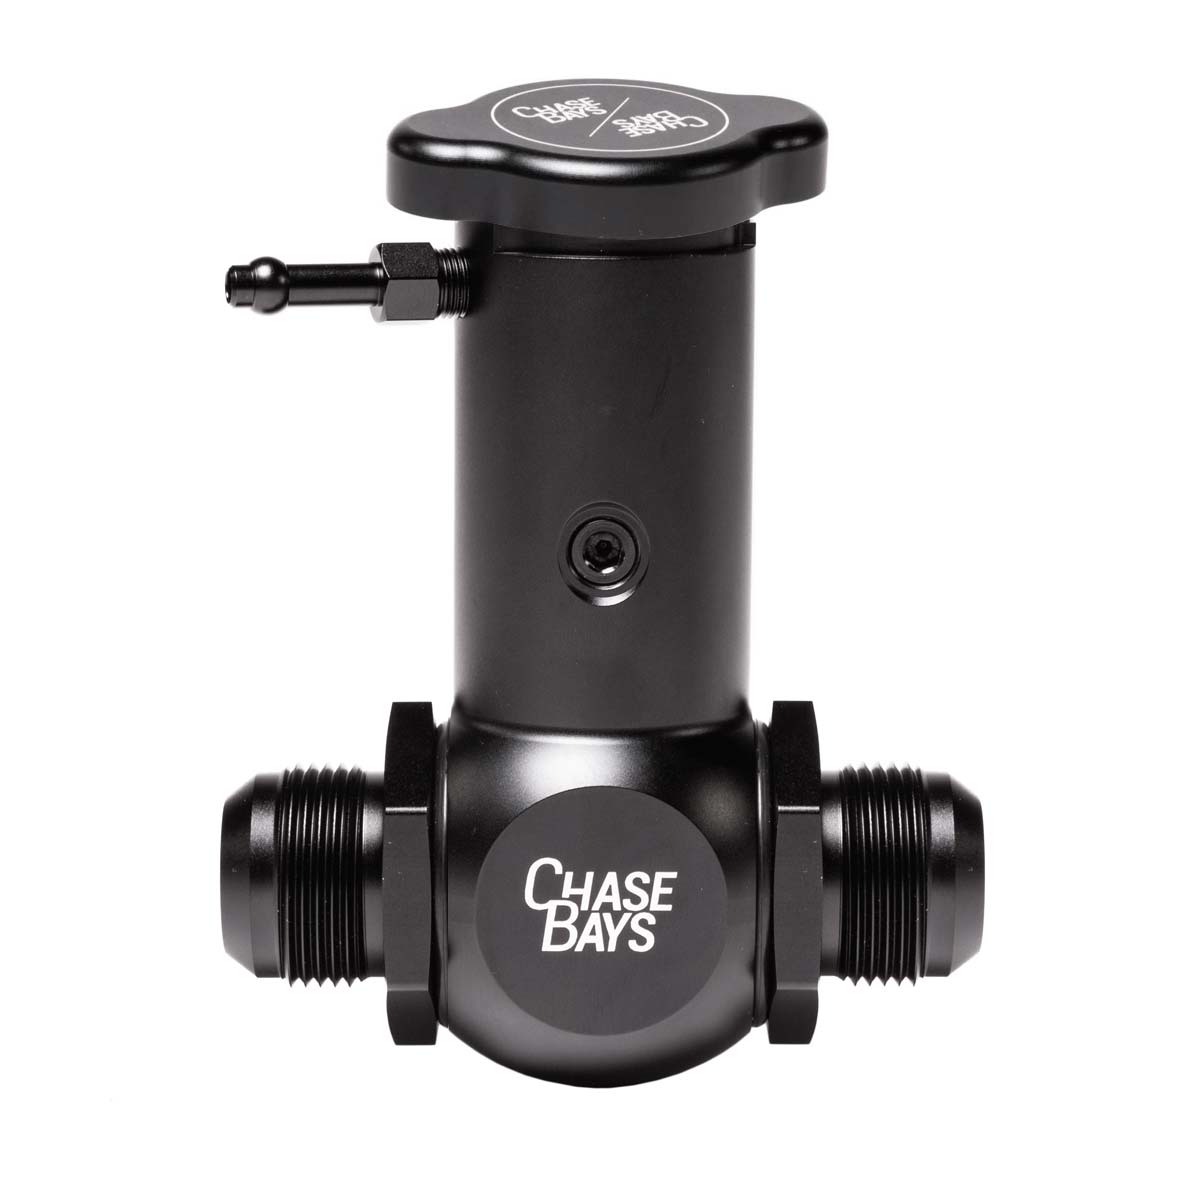 CHASE BAYS Raised Coolant Water Filler Neck